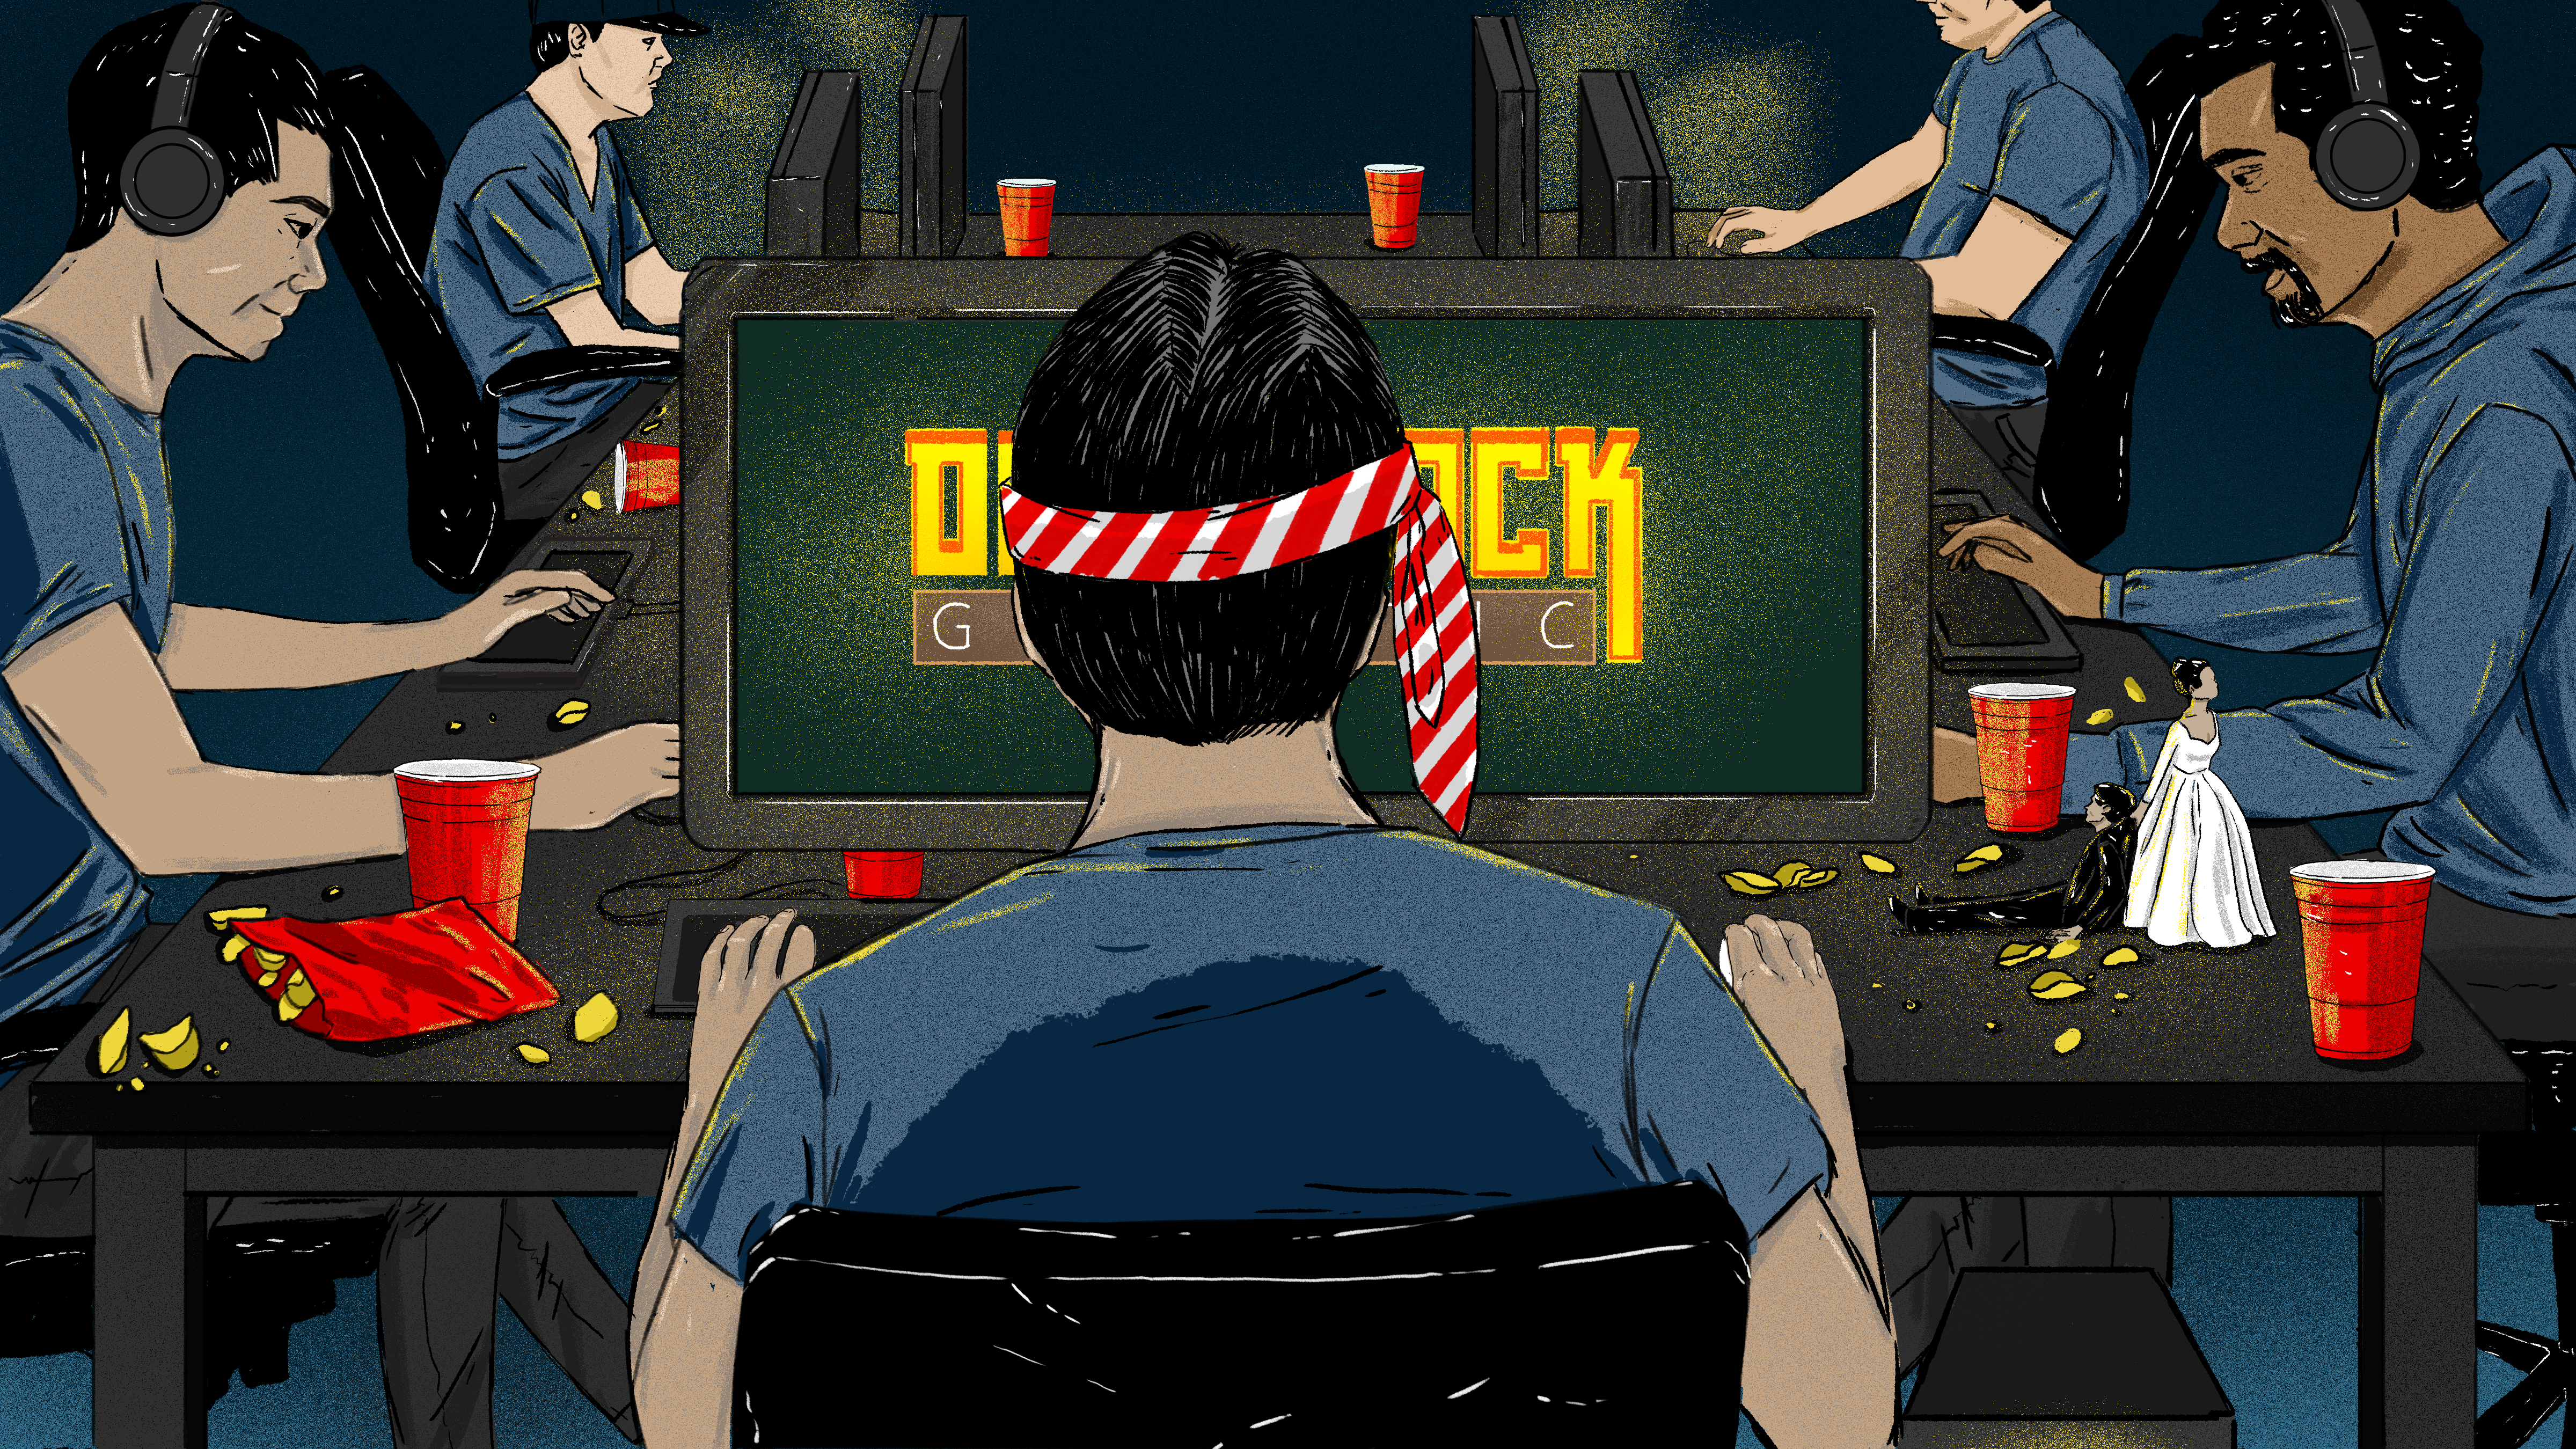 Strip Clubs? Nah. The New Bachelor Party Is A Weekend Of Video Games